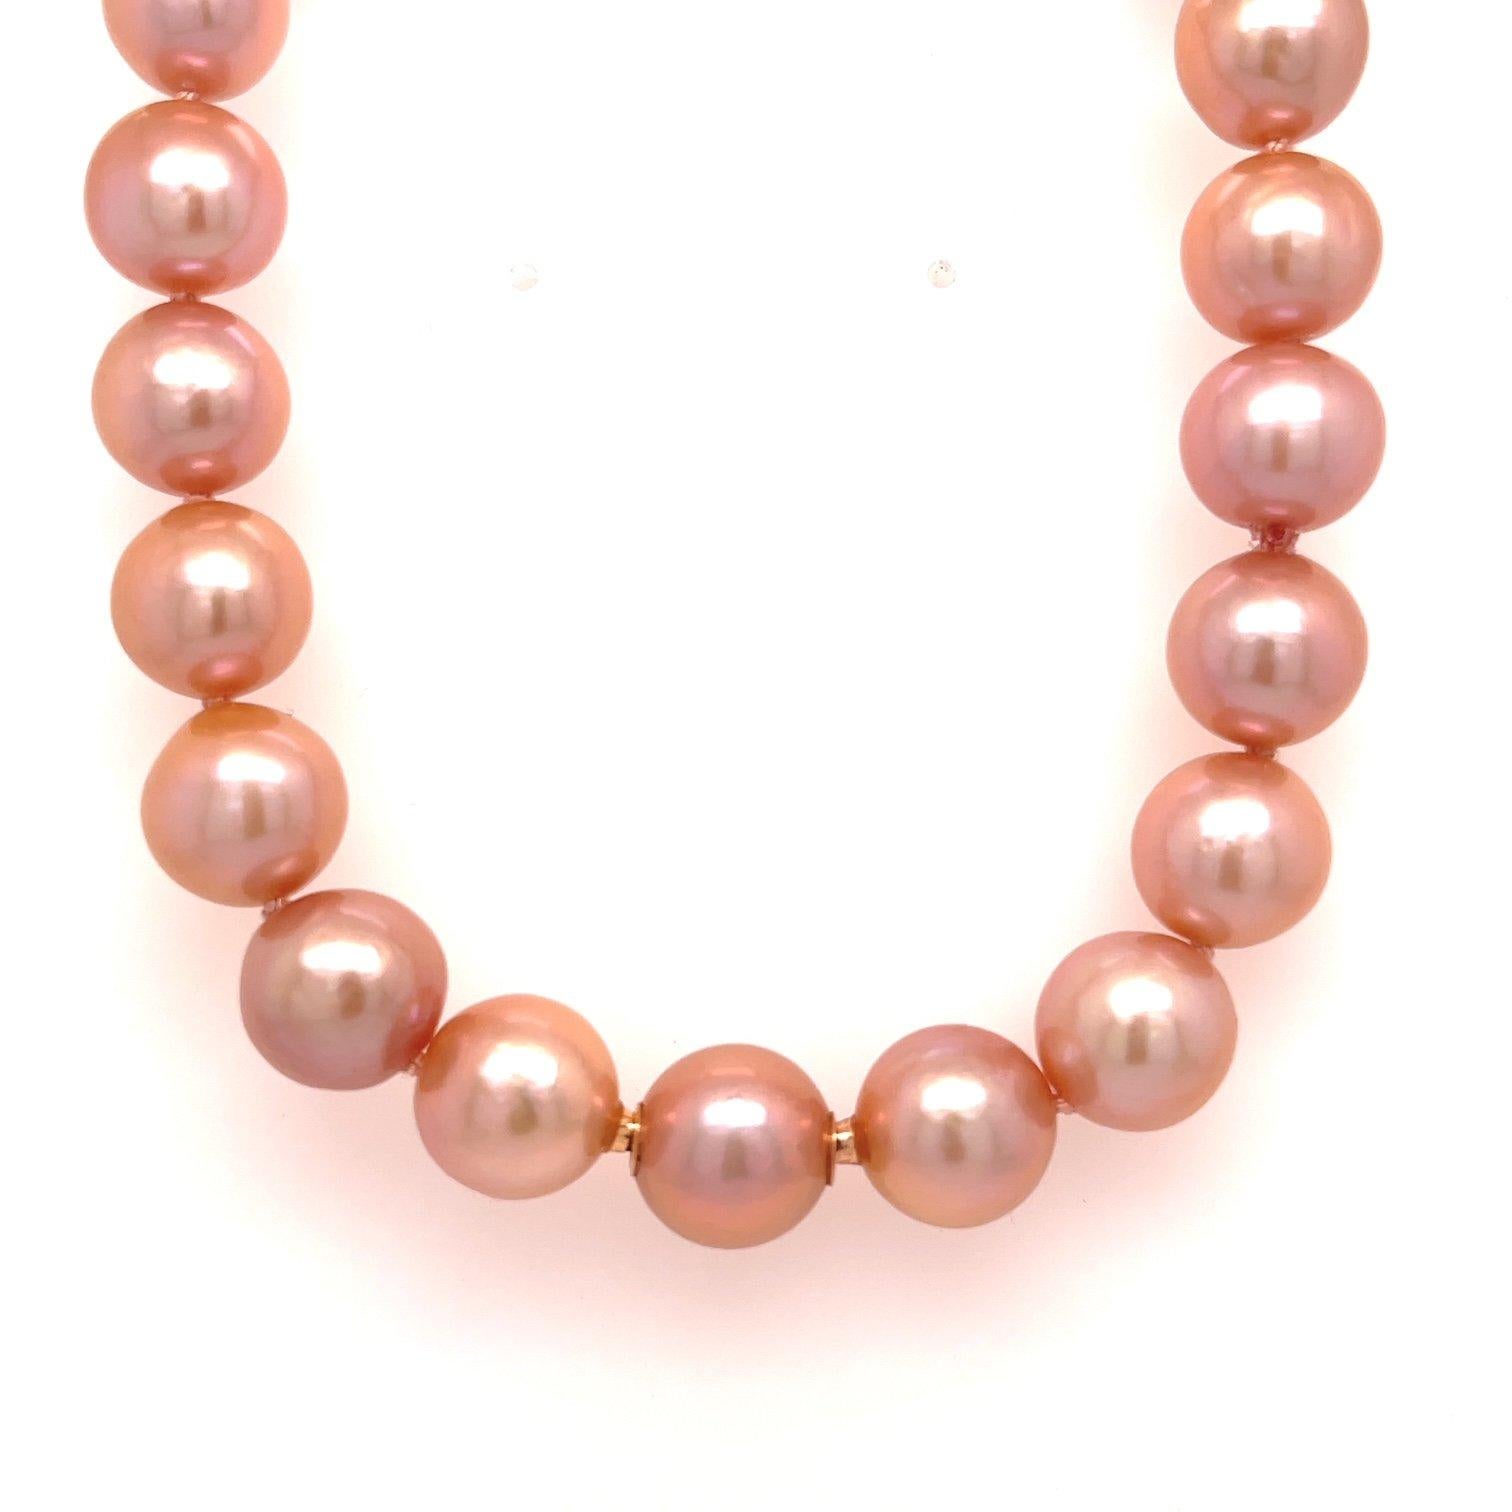 A strand of peach fresh water pearls, 10mm-11mm, cultured from Yangtze China, with 18k rose gold modullyn parts.  And a brown and white druzy heart clasp in 18k rose gold set with a .59ctw brown rose cut pear shape diamond. Includes a peach fresh